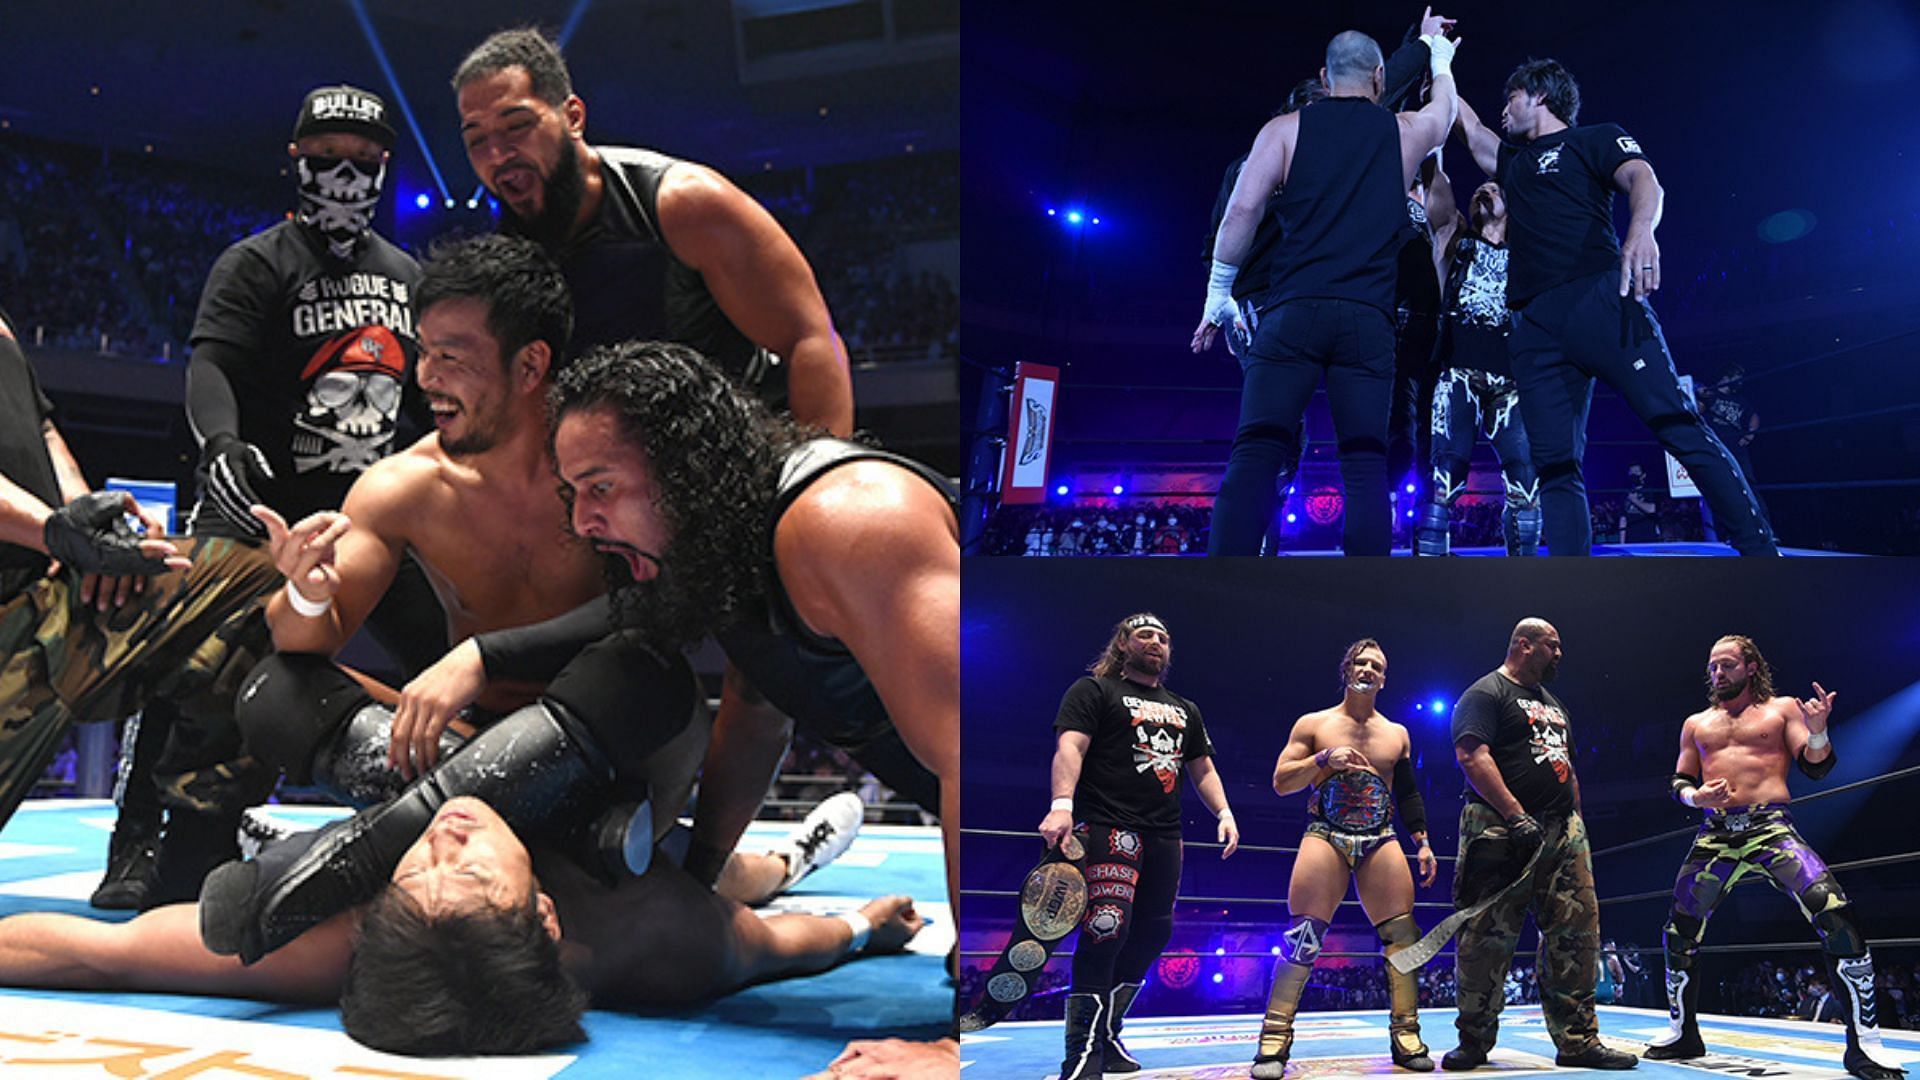 Bullet Club is a faction based in NJPW